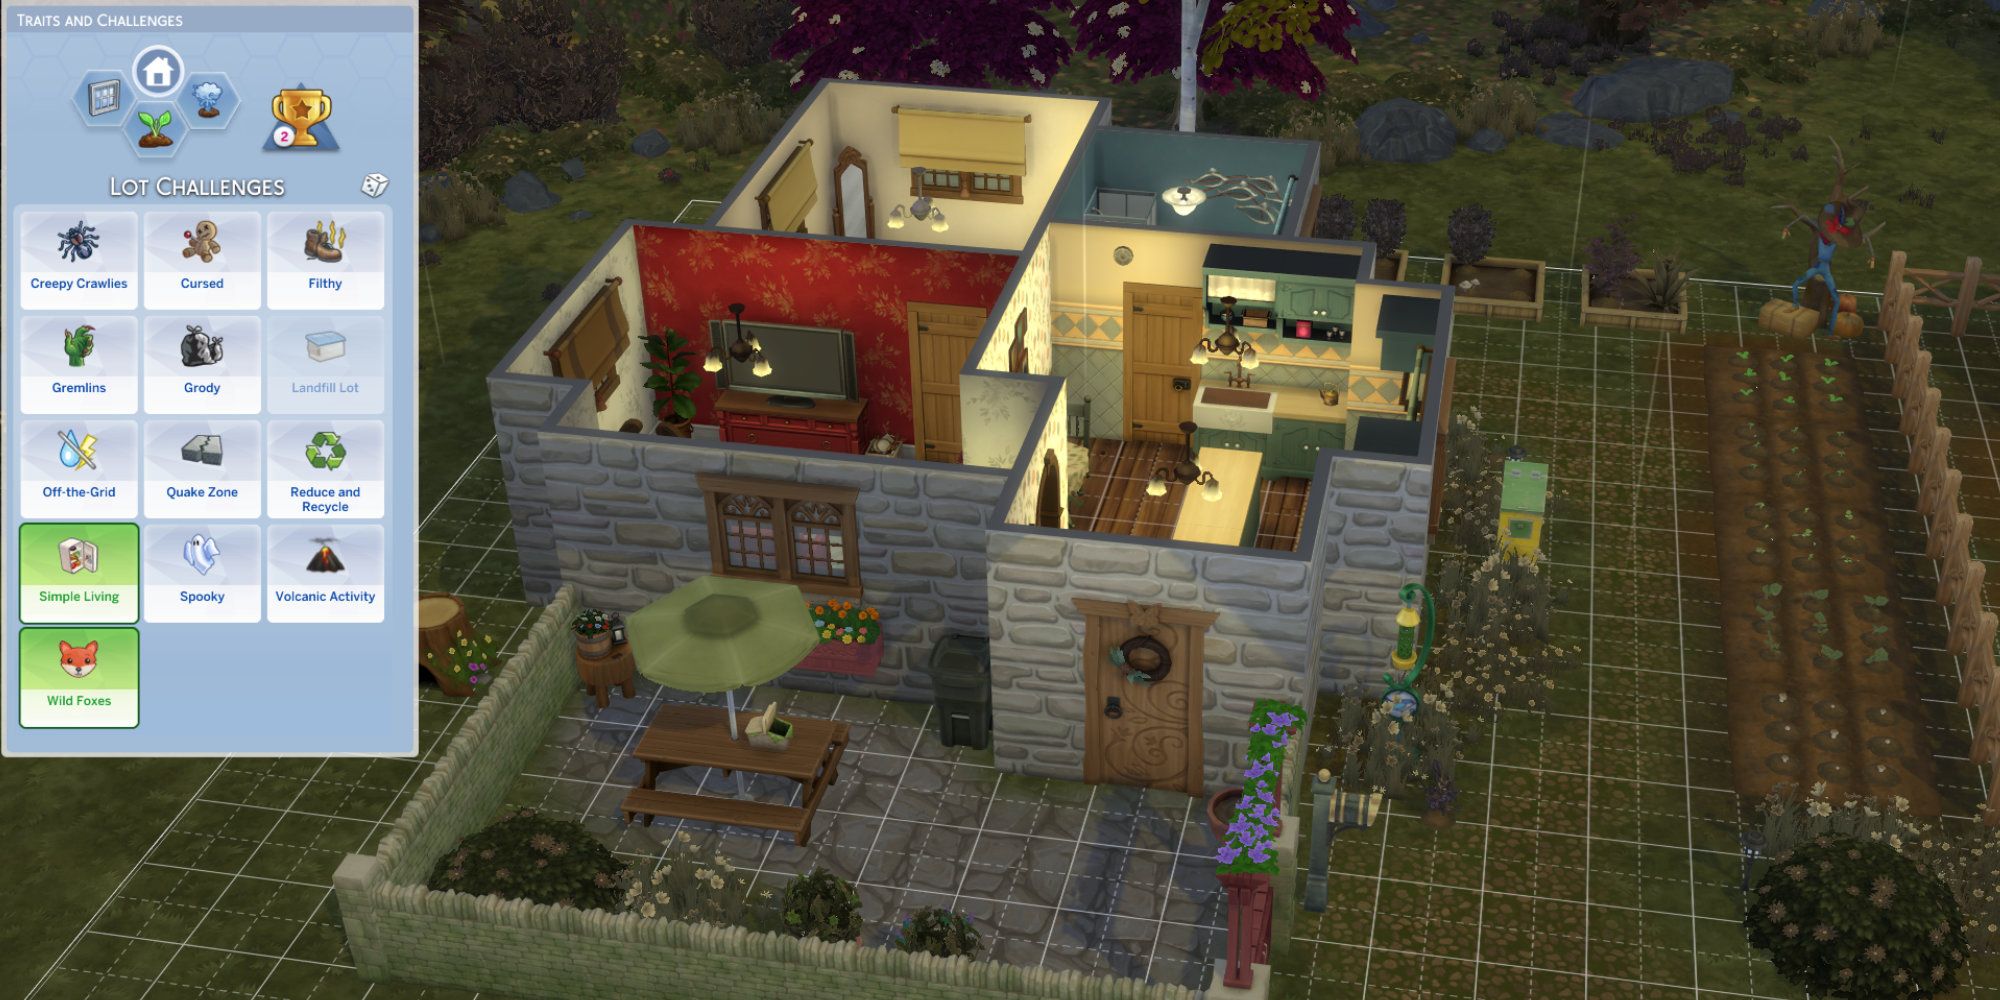 Sims 4 lot challenges screen open on a lot in henford-on-bagley